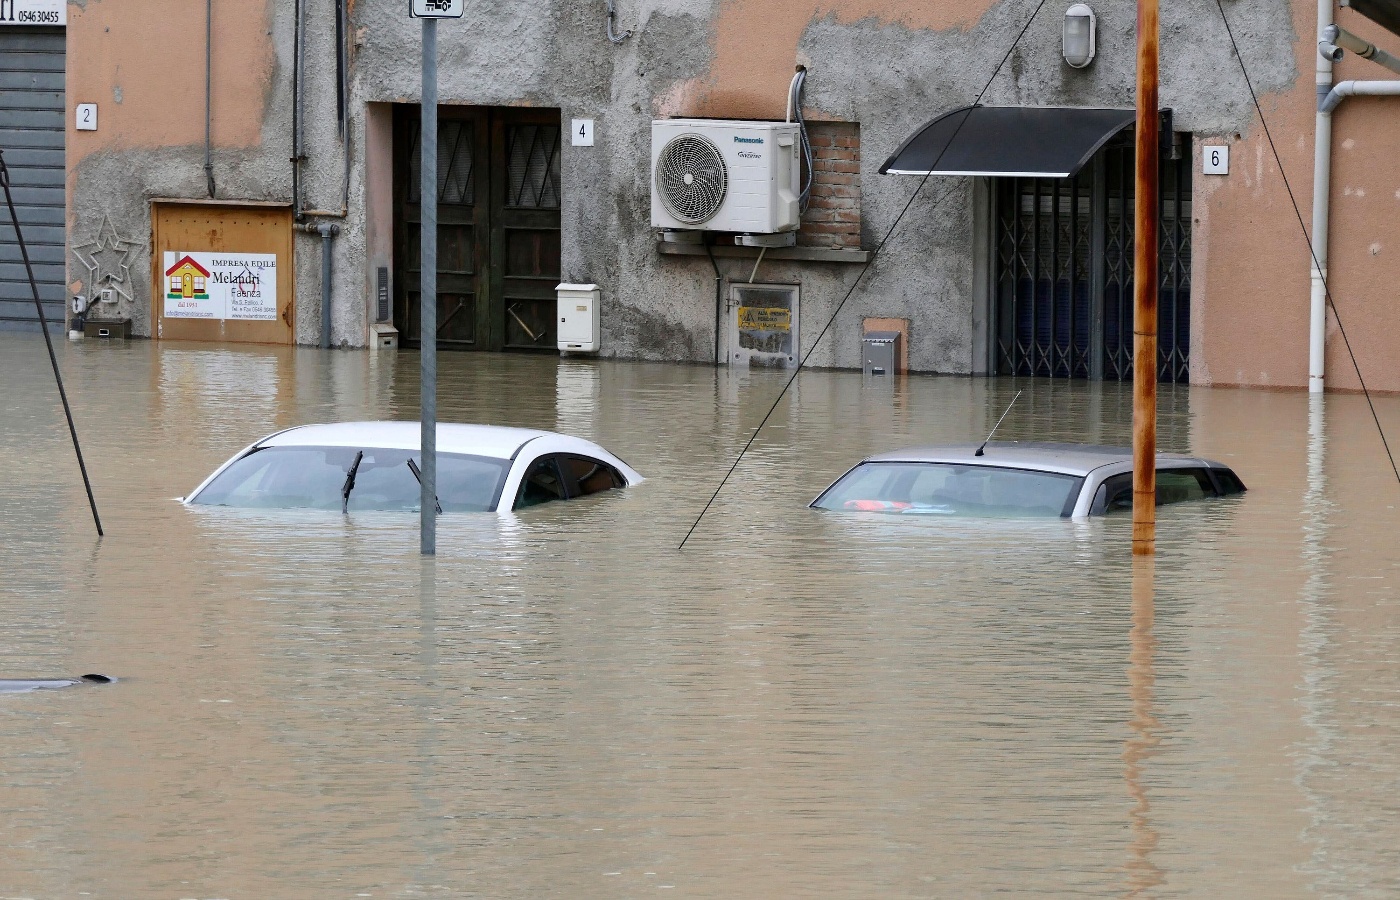 The Emilia Romagna region has been hit by heavy floods.